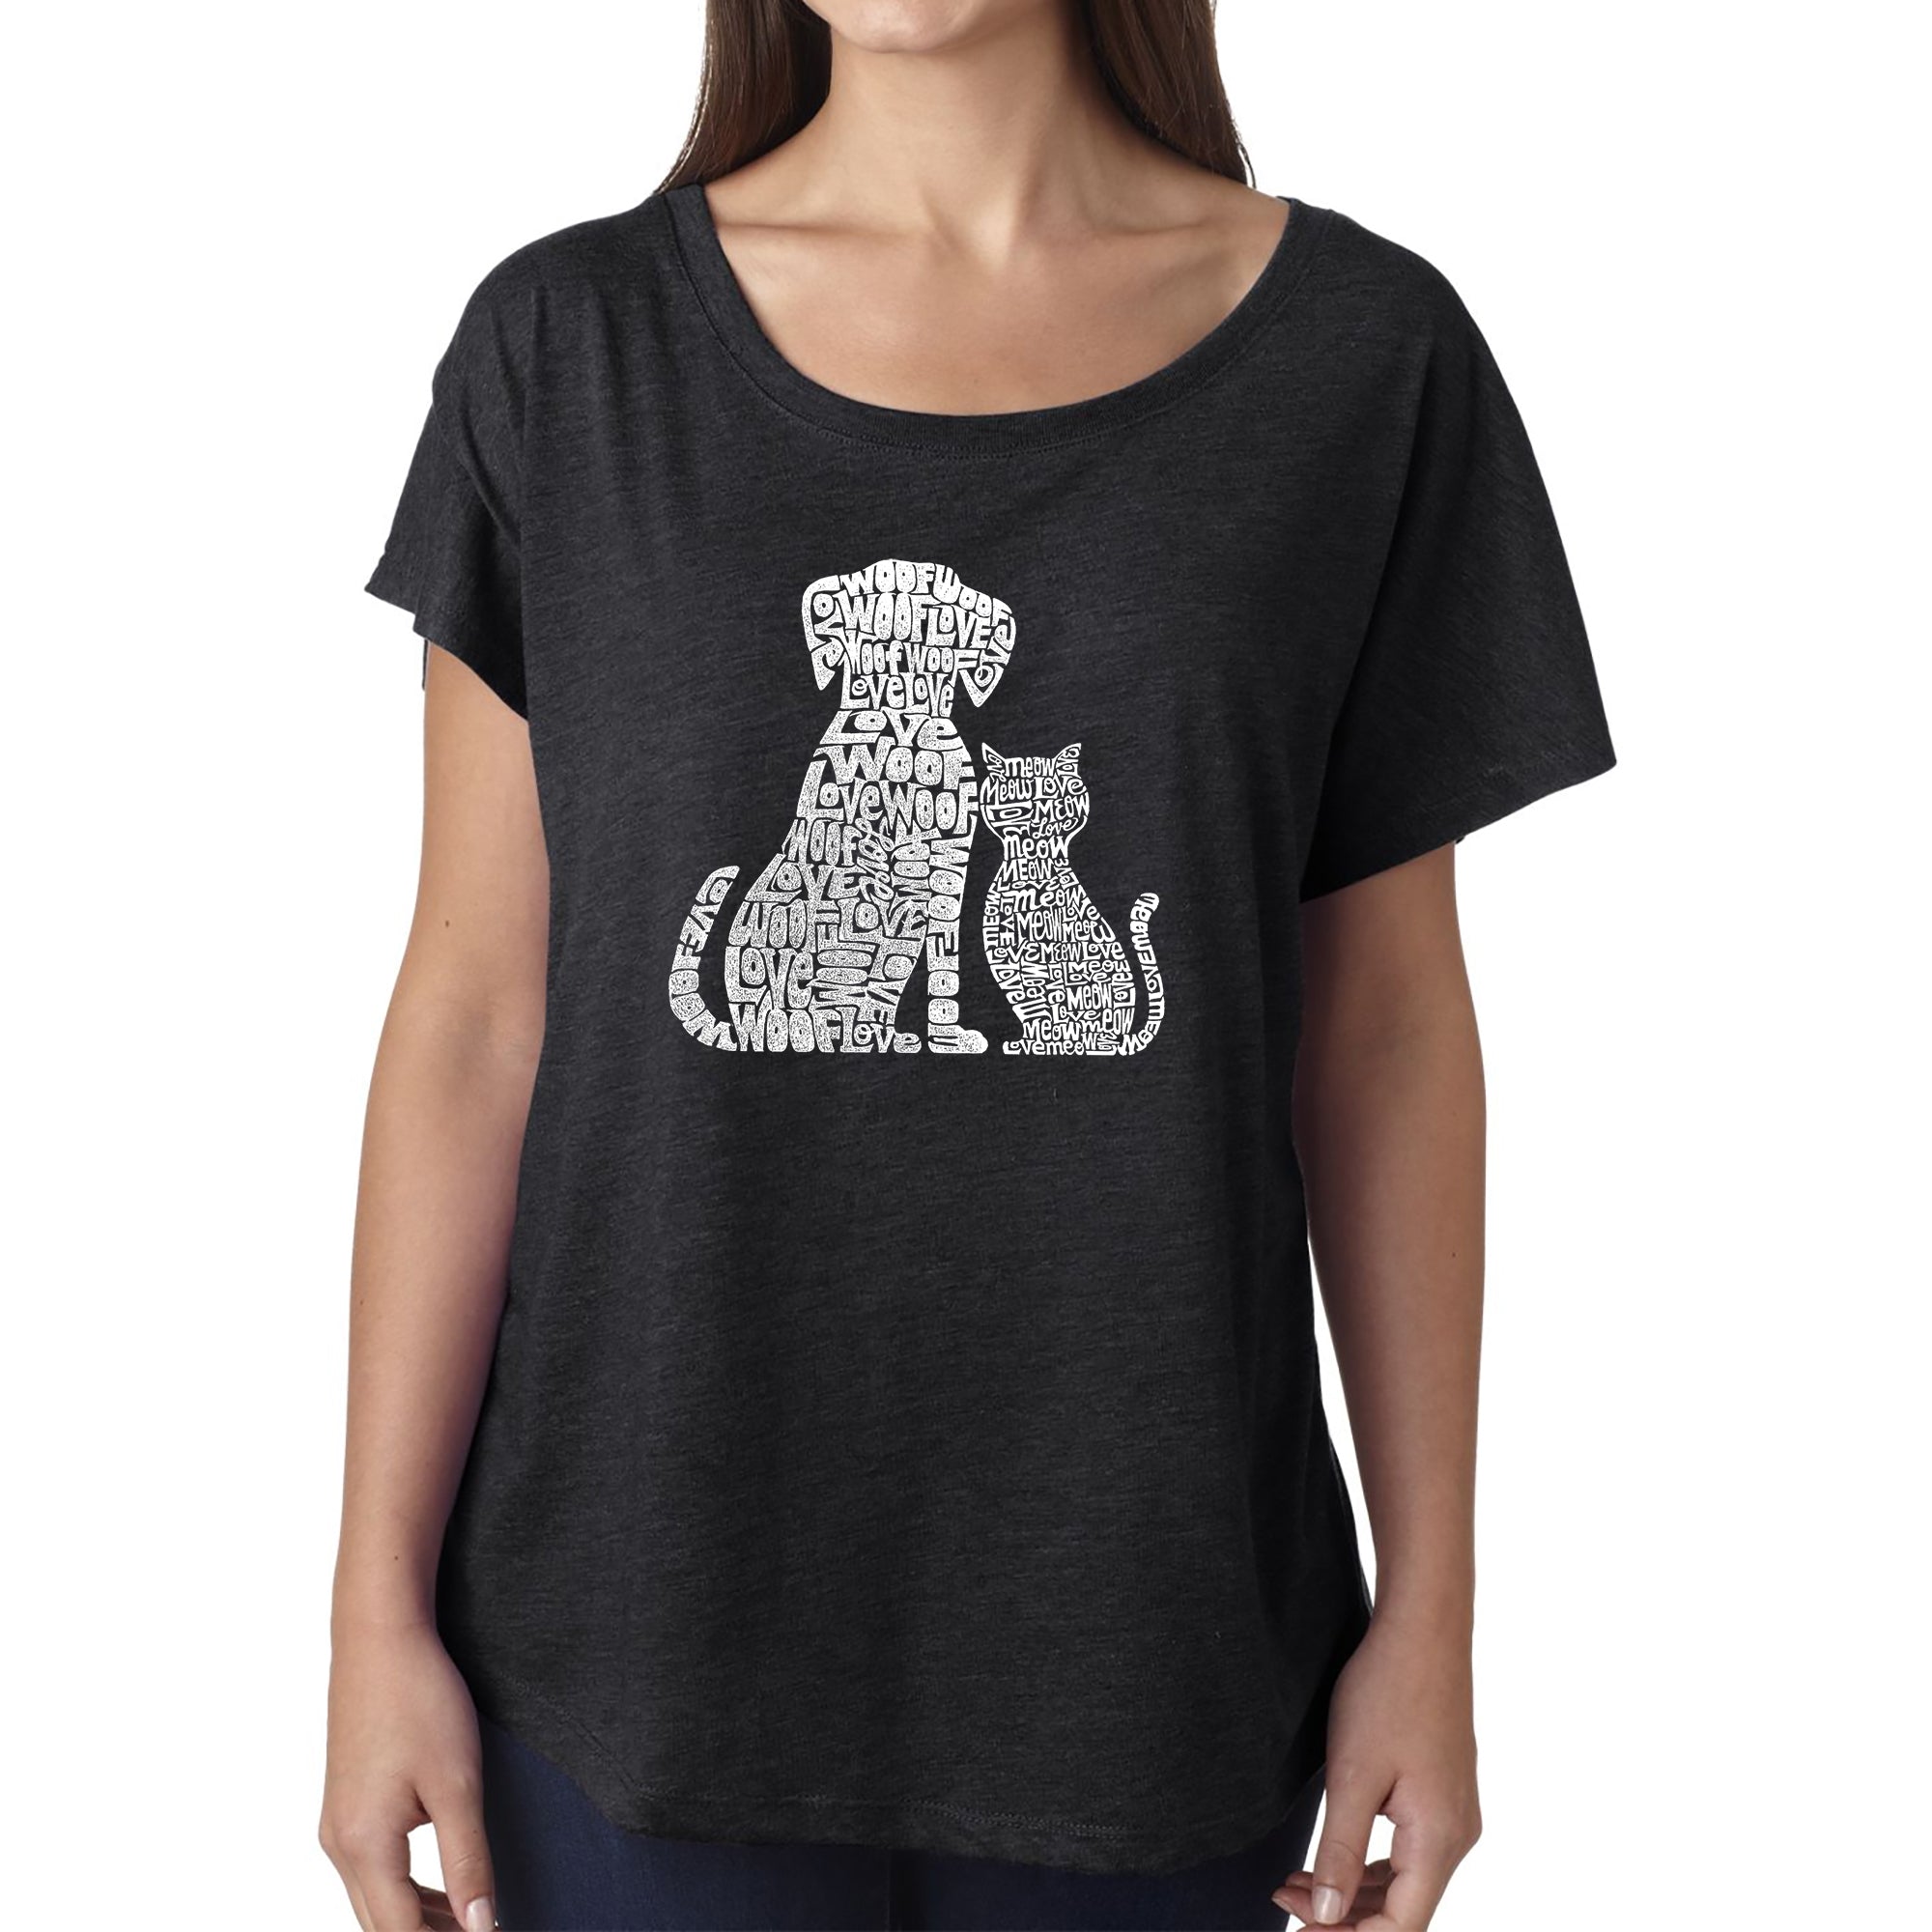 Dogs And Cats - Women's Loose Fit Dolman Cut Word Art Shirt - Black - X-Large